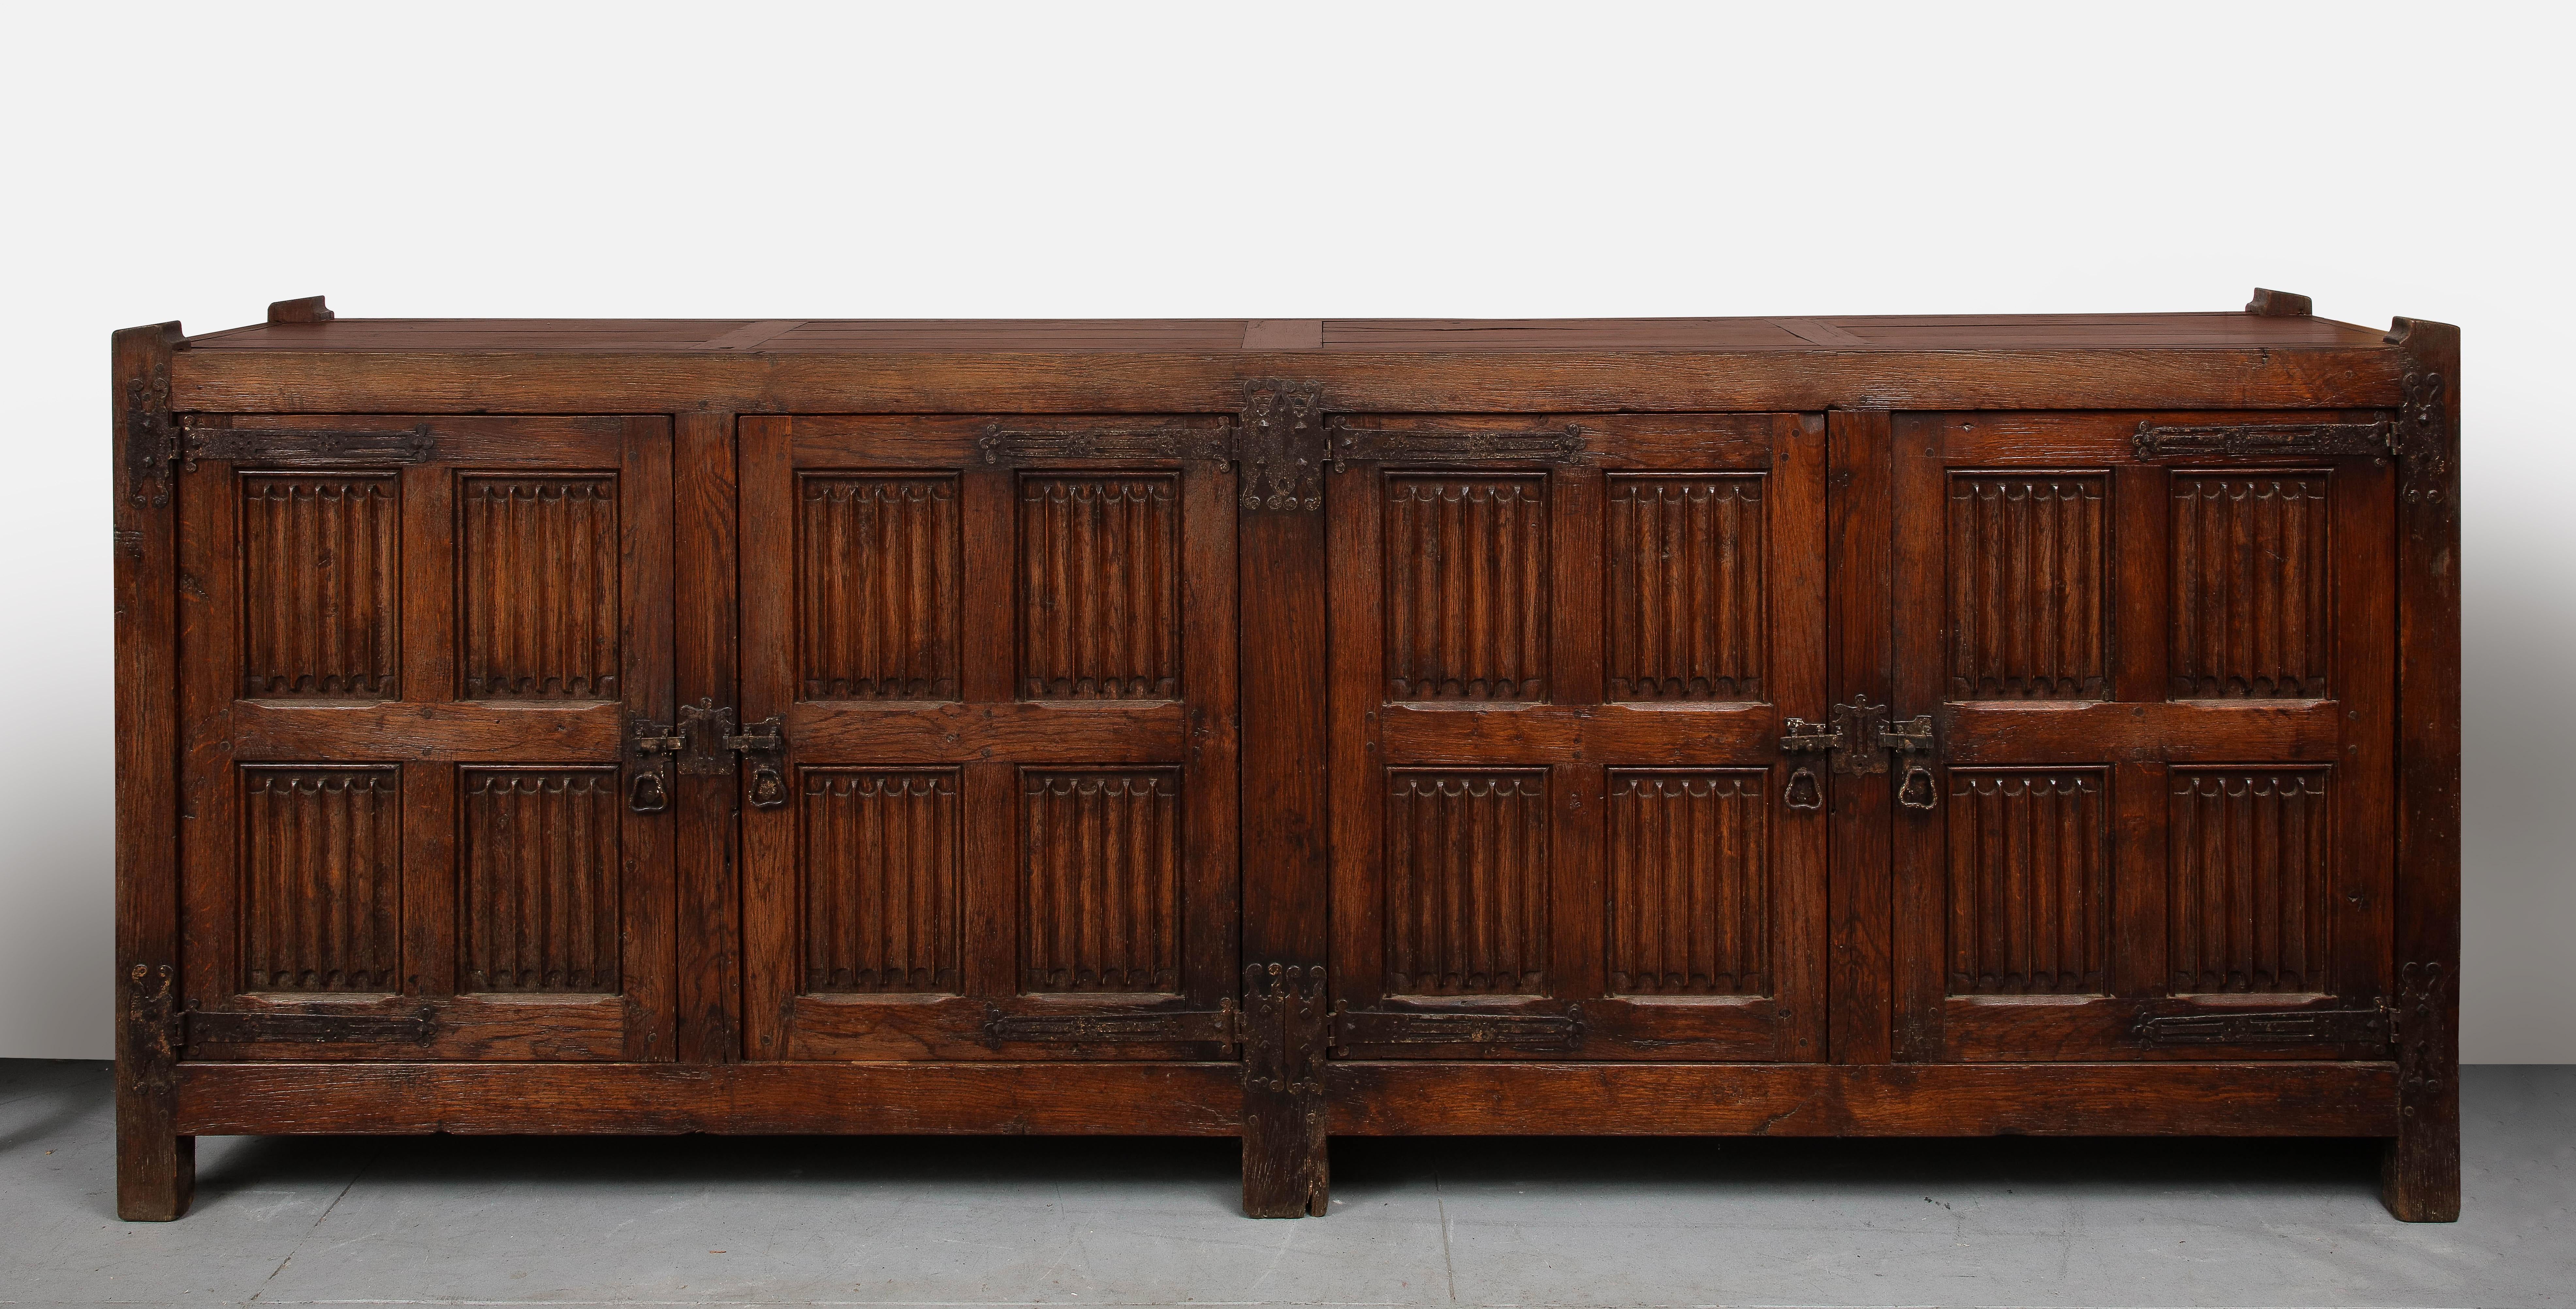 Renaissance Revival 19th C. Hand Carved Oak Sideboard with Shelves/Drawers, Nunnery, France For Sale